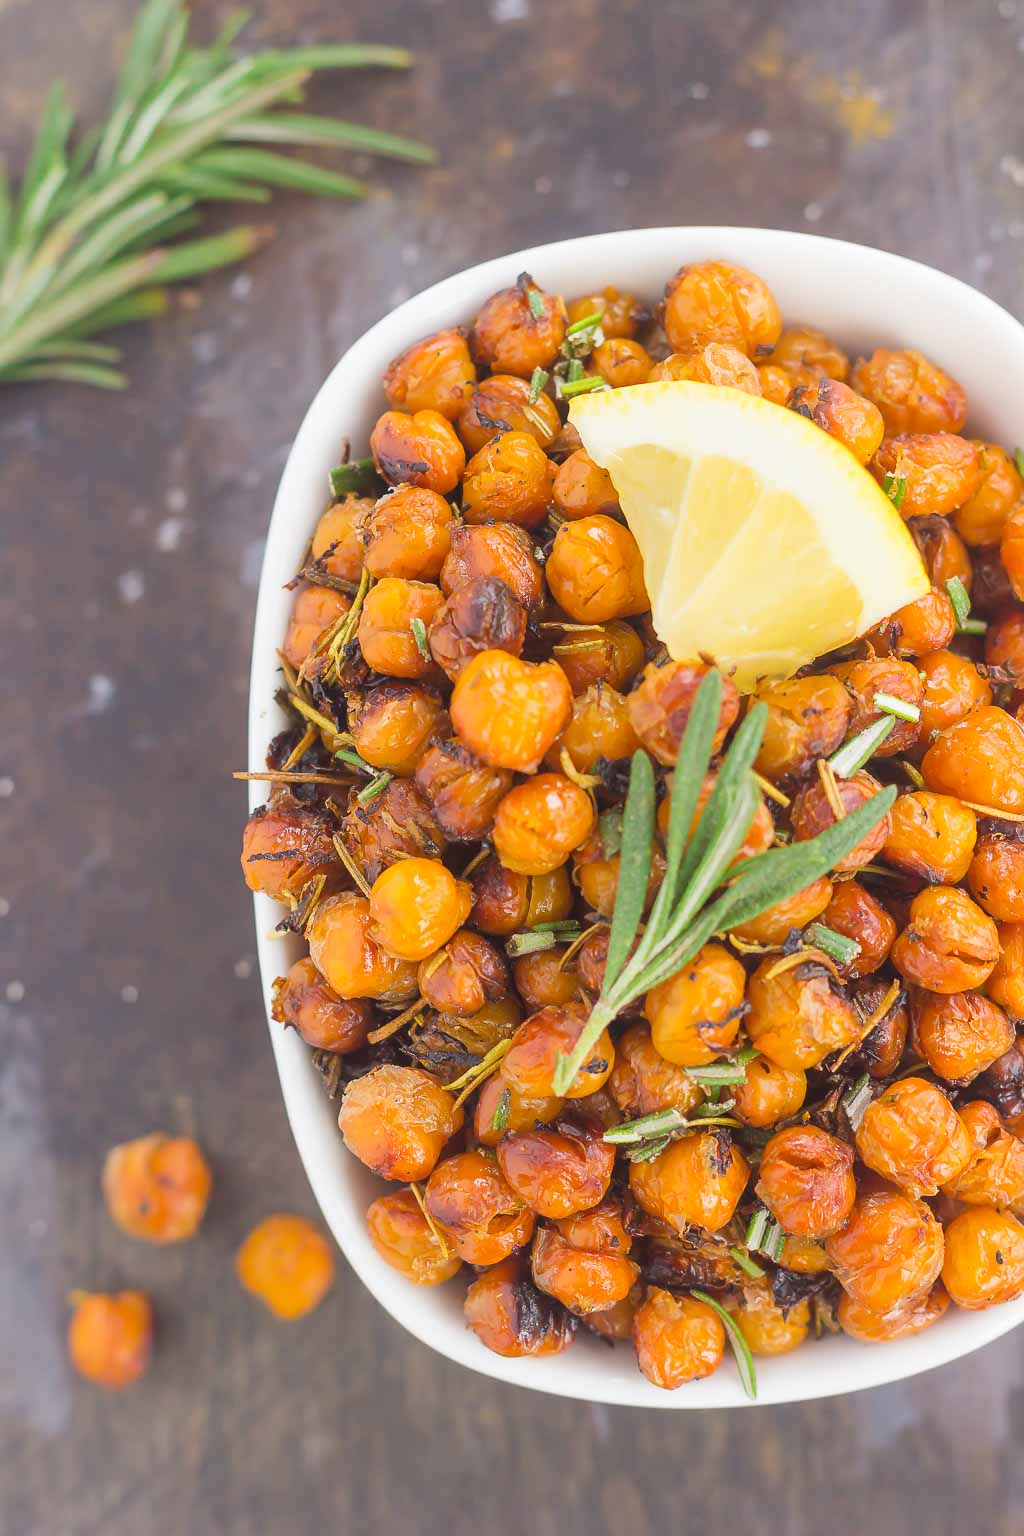 These Roasted Lemon Rosemary Chickpeas make a delicious snack or great addition to salads or soups. Packed with tangy lemon and fresh rosemary, these crunchy chickpeas are easy to make and perfect for when the munchies strike!